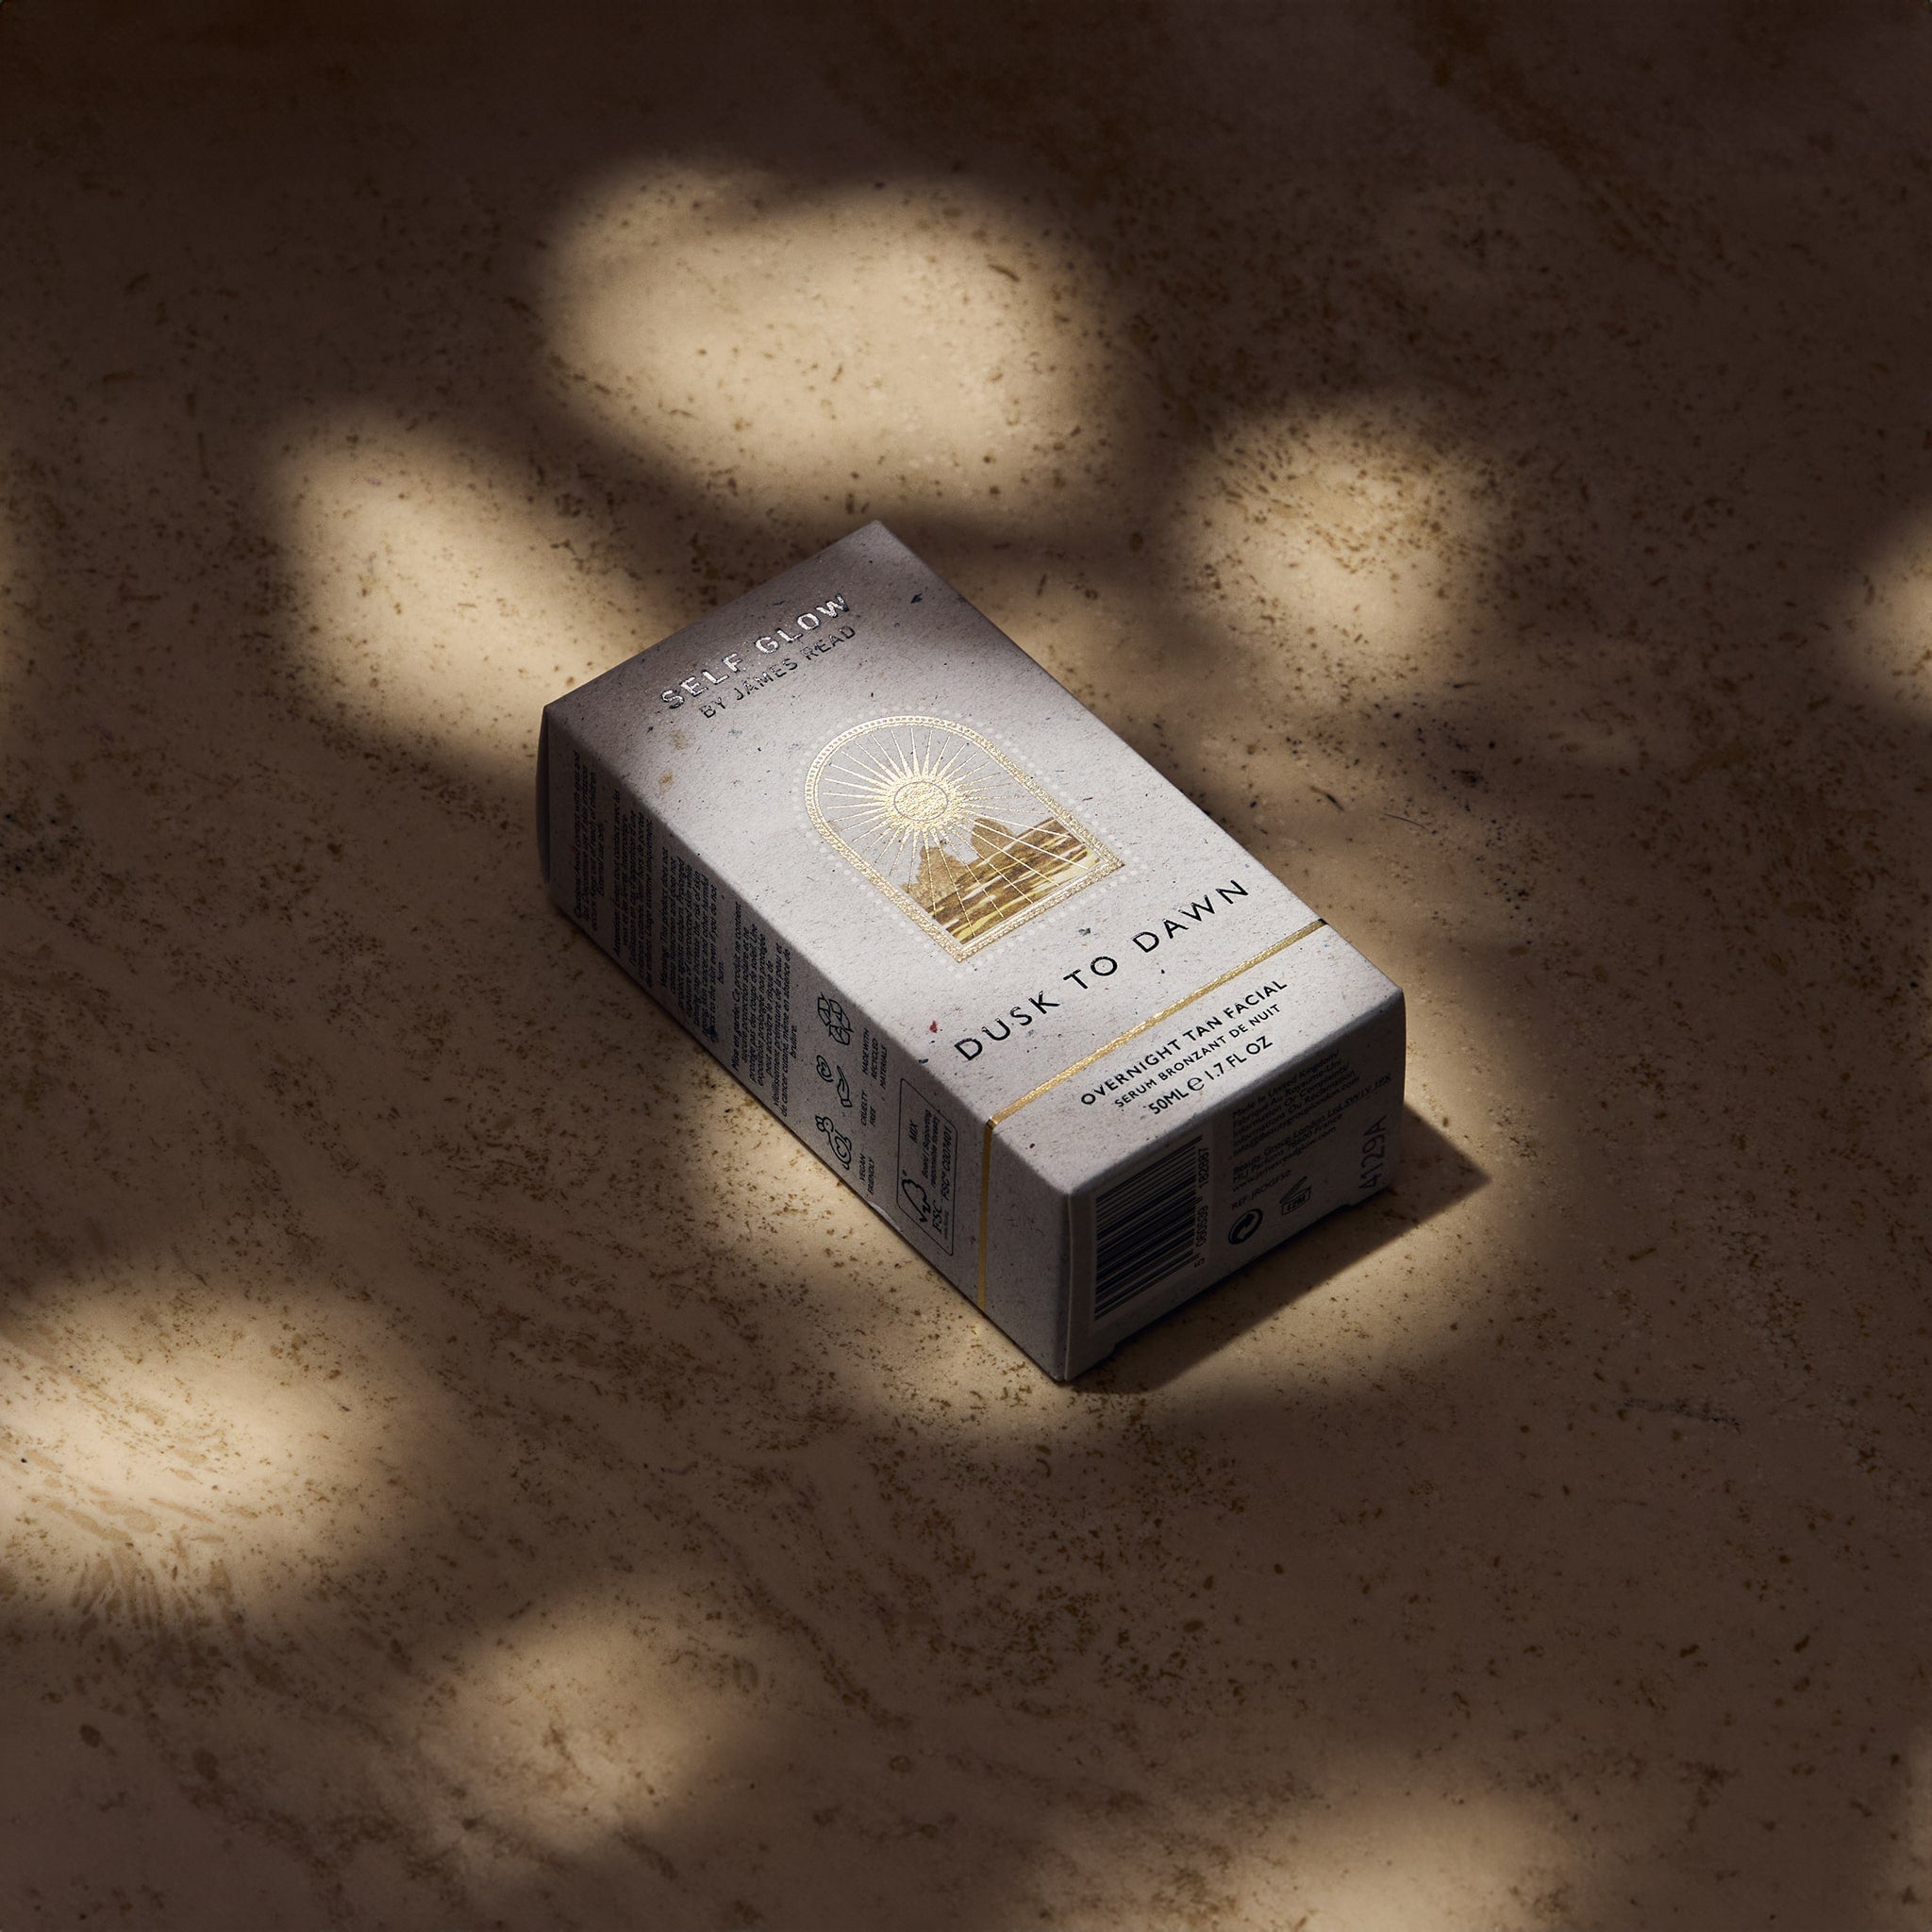 The recycled cardboard packaging box of Self Glow by James Read Dusk to Dawn Overnight Tan Facial, featuring vegetable-based inks and eco-friendly materials, displayed under dappled light.